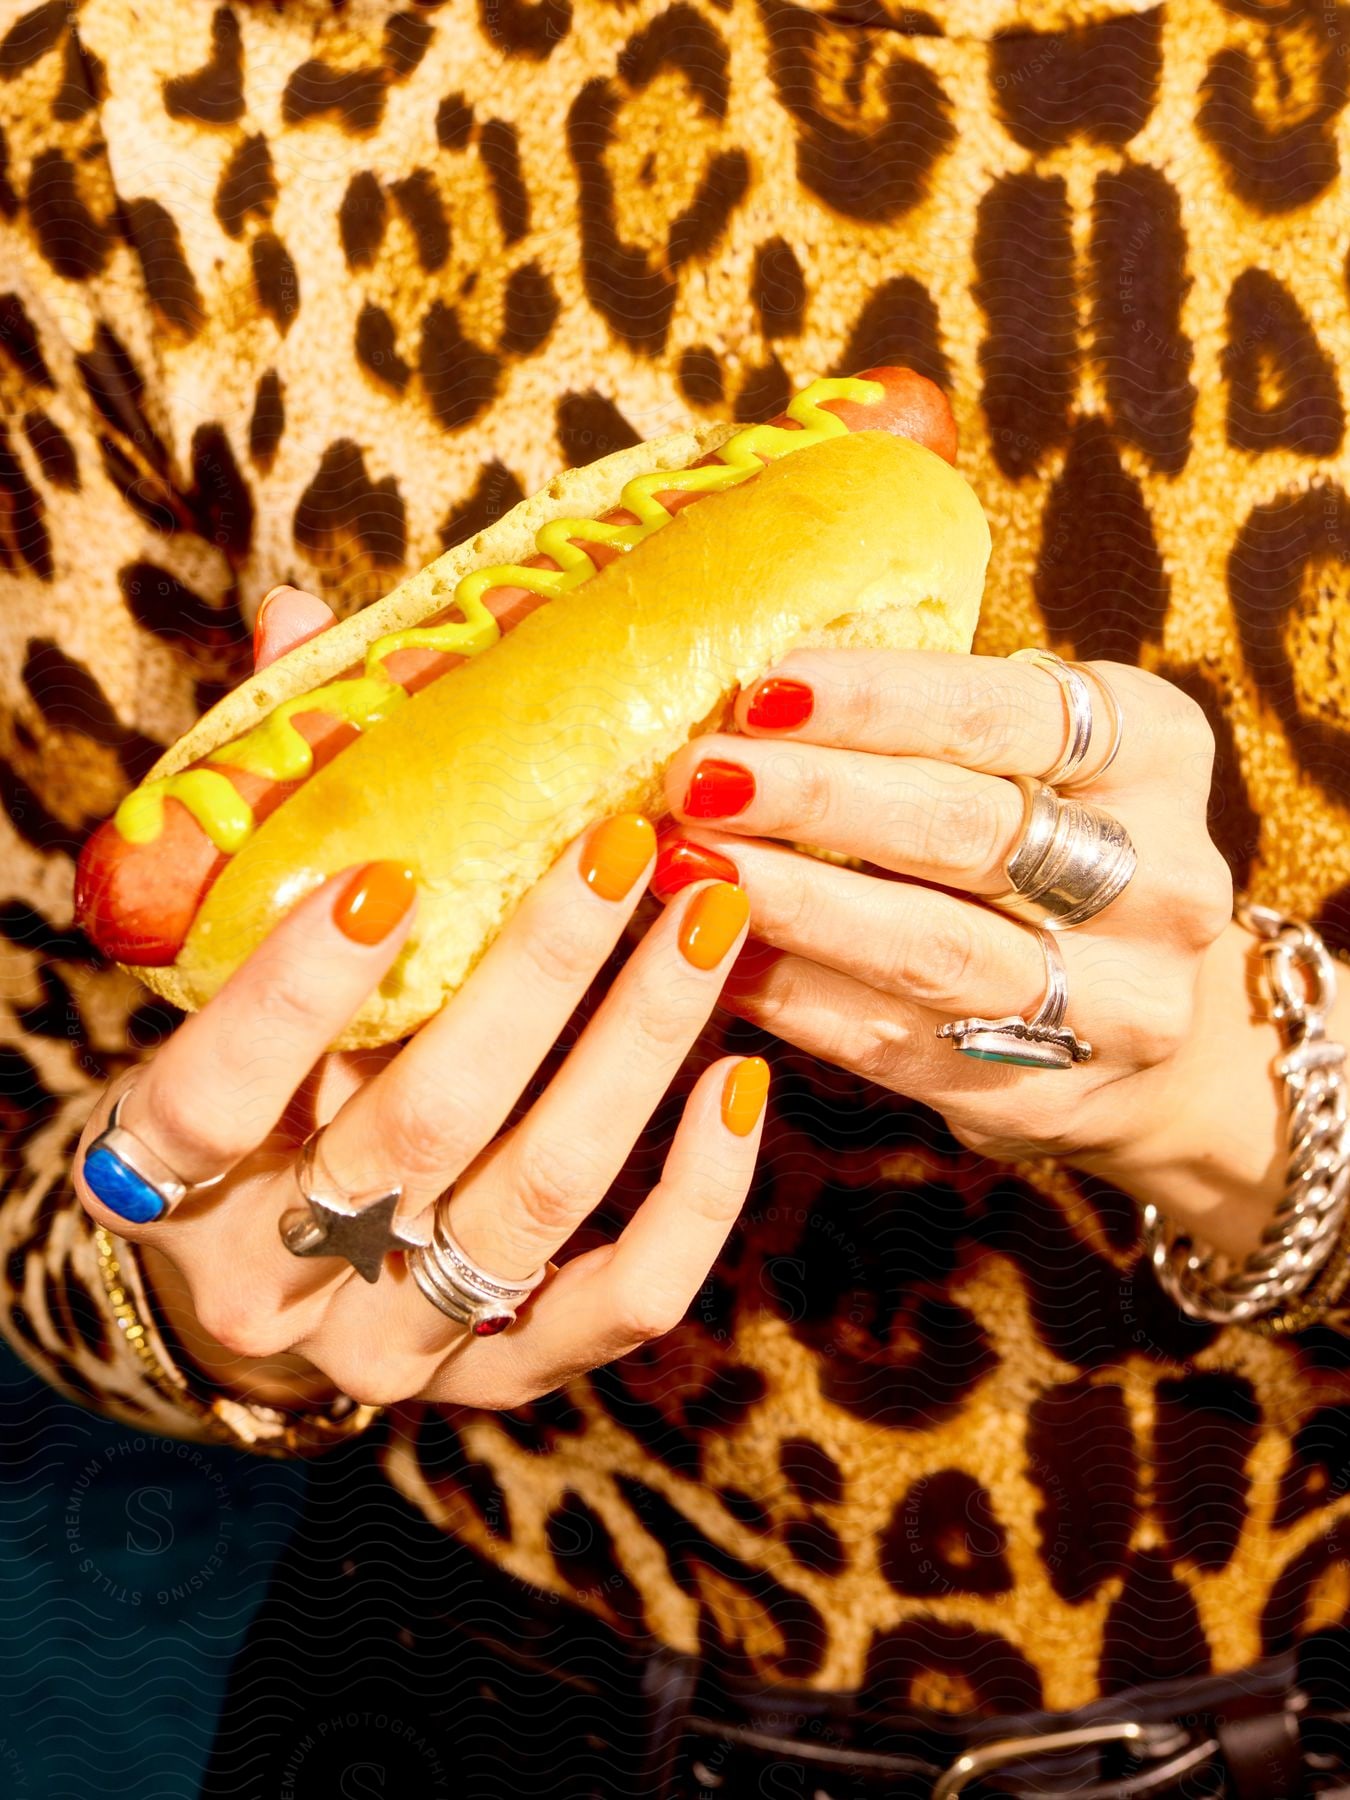 Hands of a person with colored nails holding a hot dog in contrast to the person's yellow and black clothing